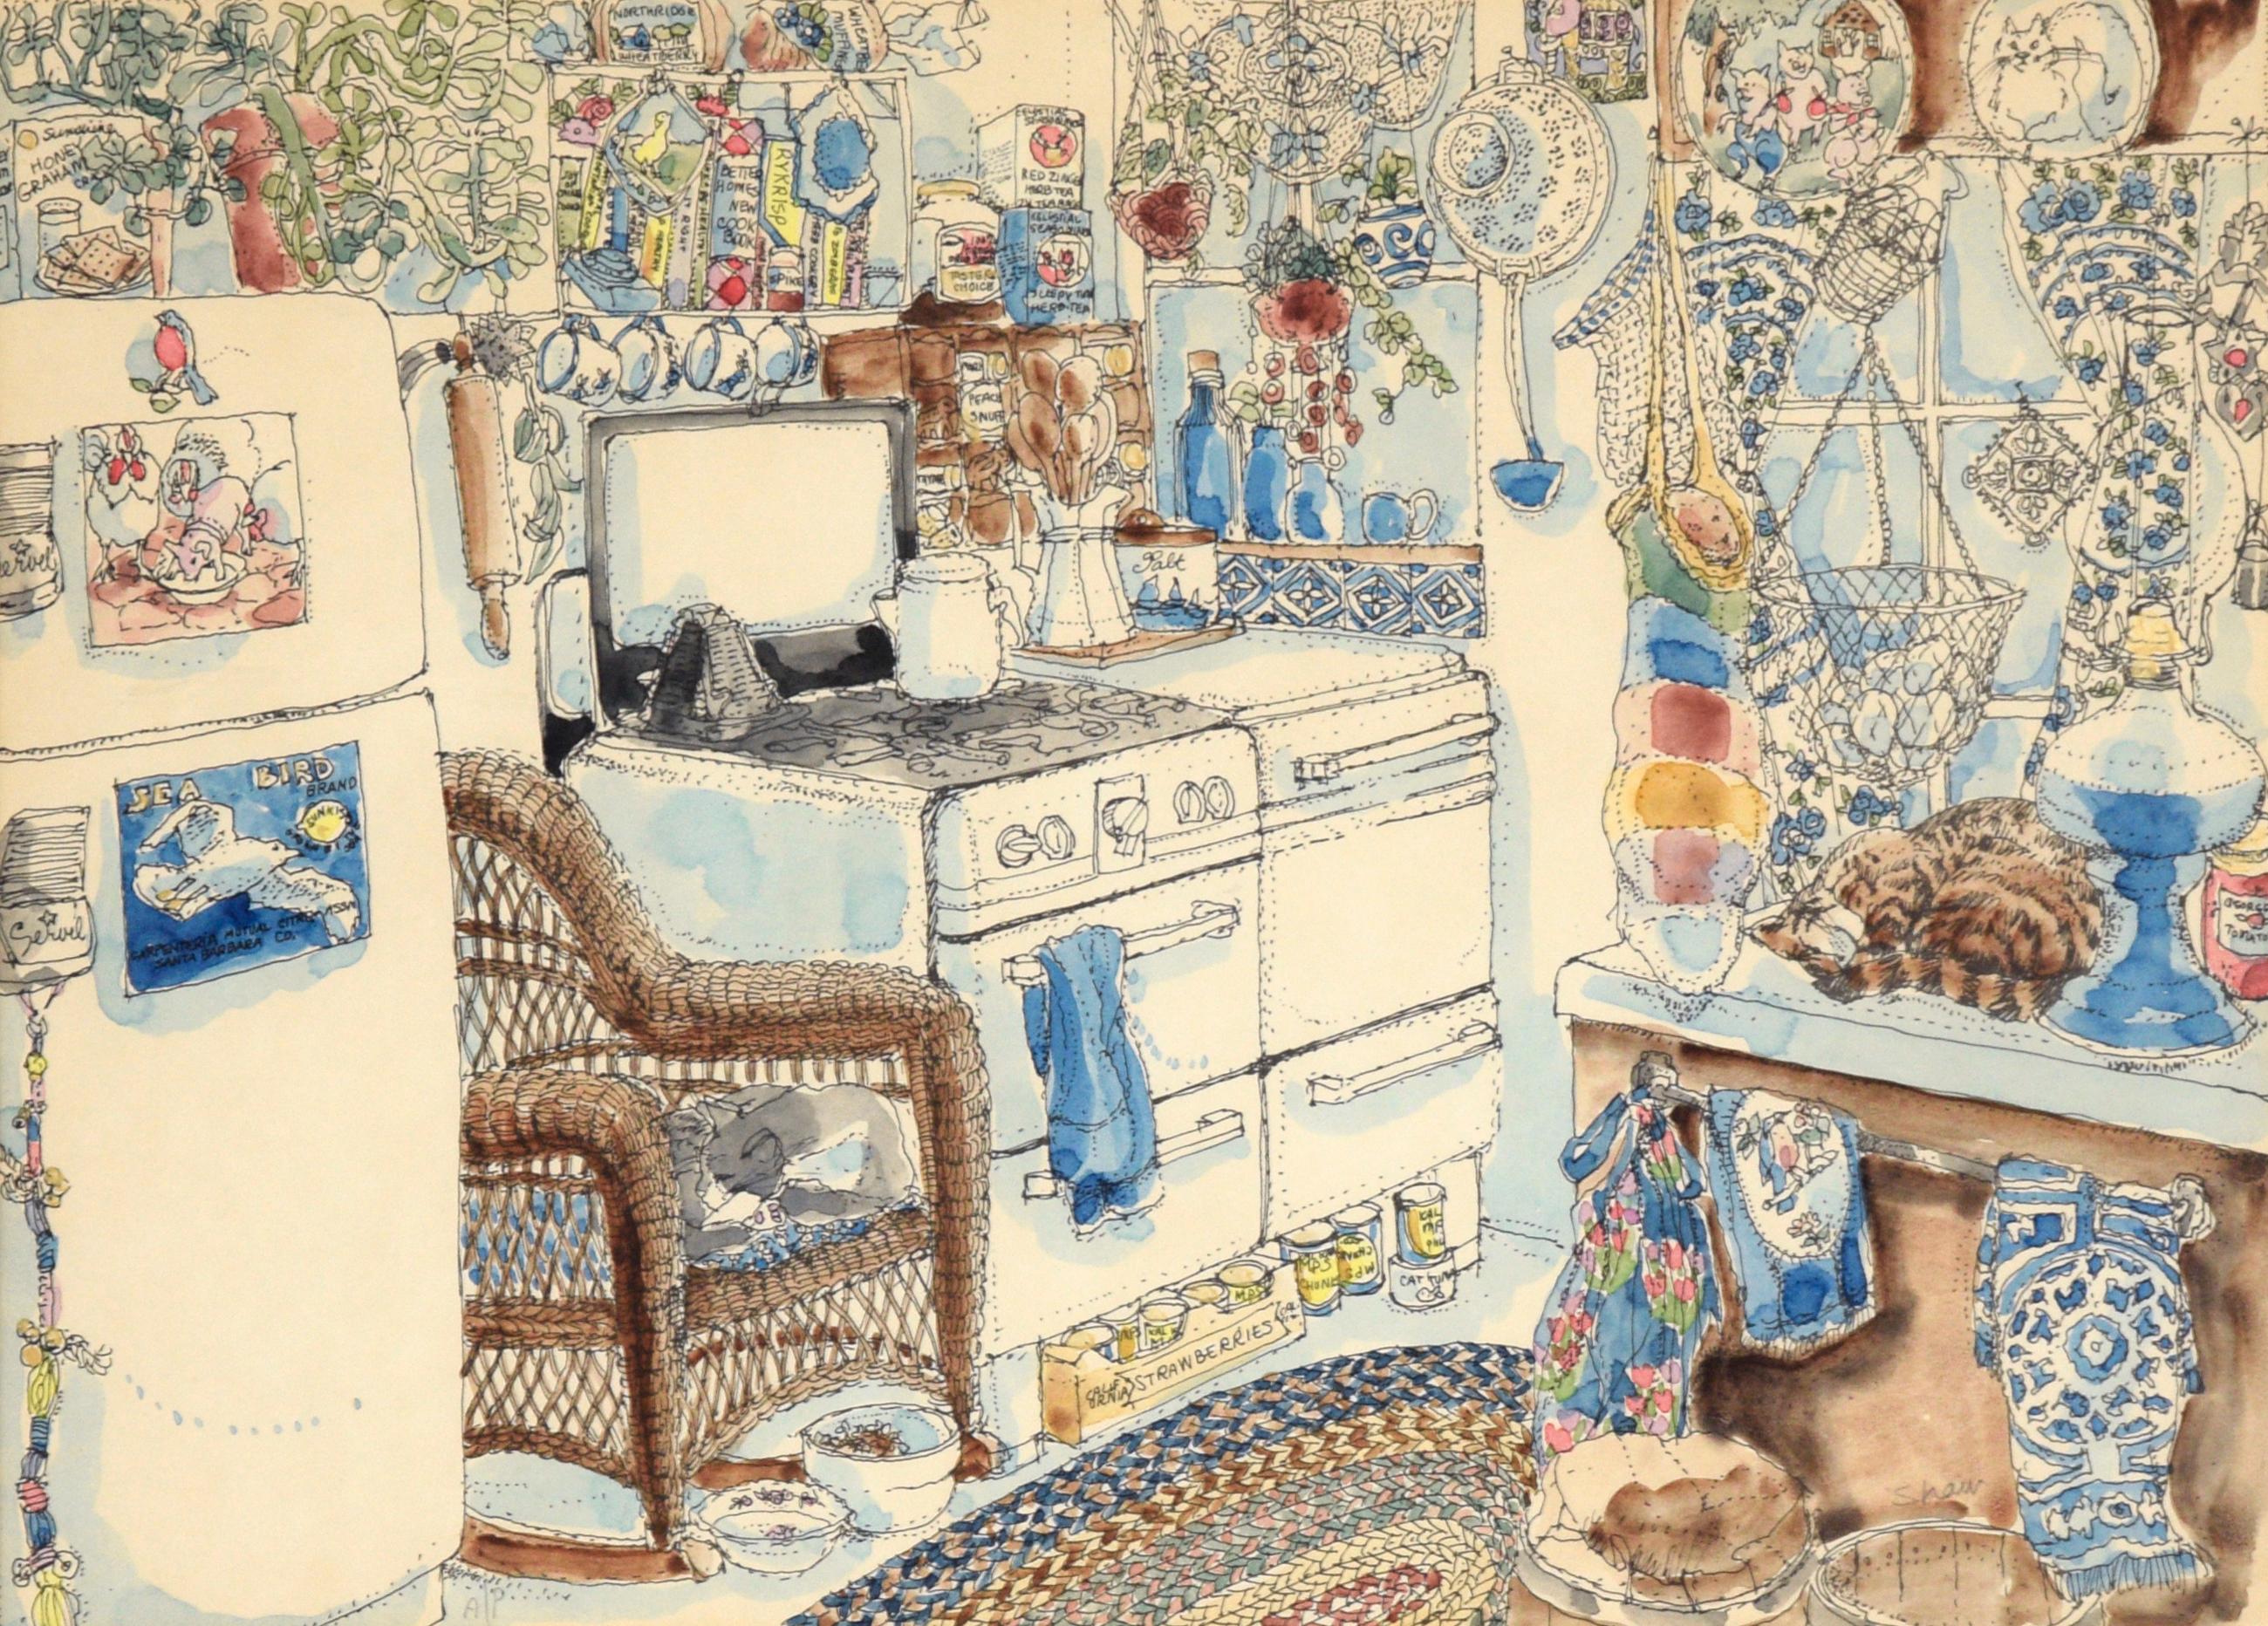 Cozy Kitchen with Cats - Art by Alice Shaw